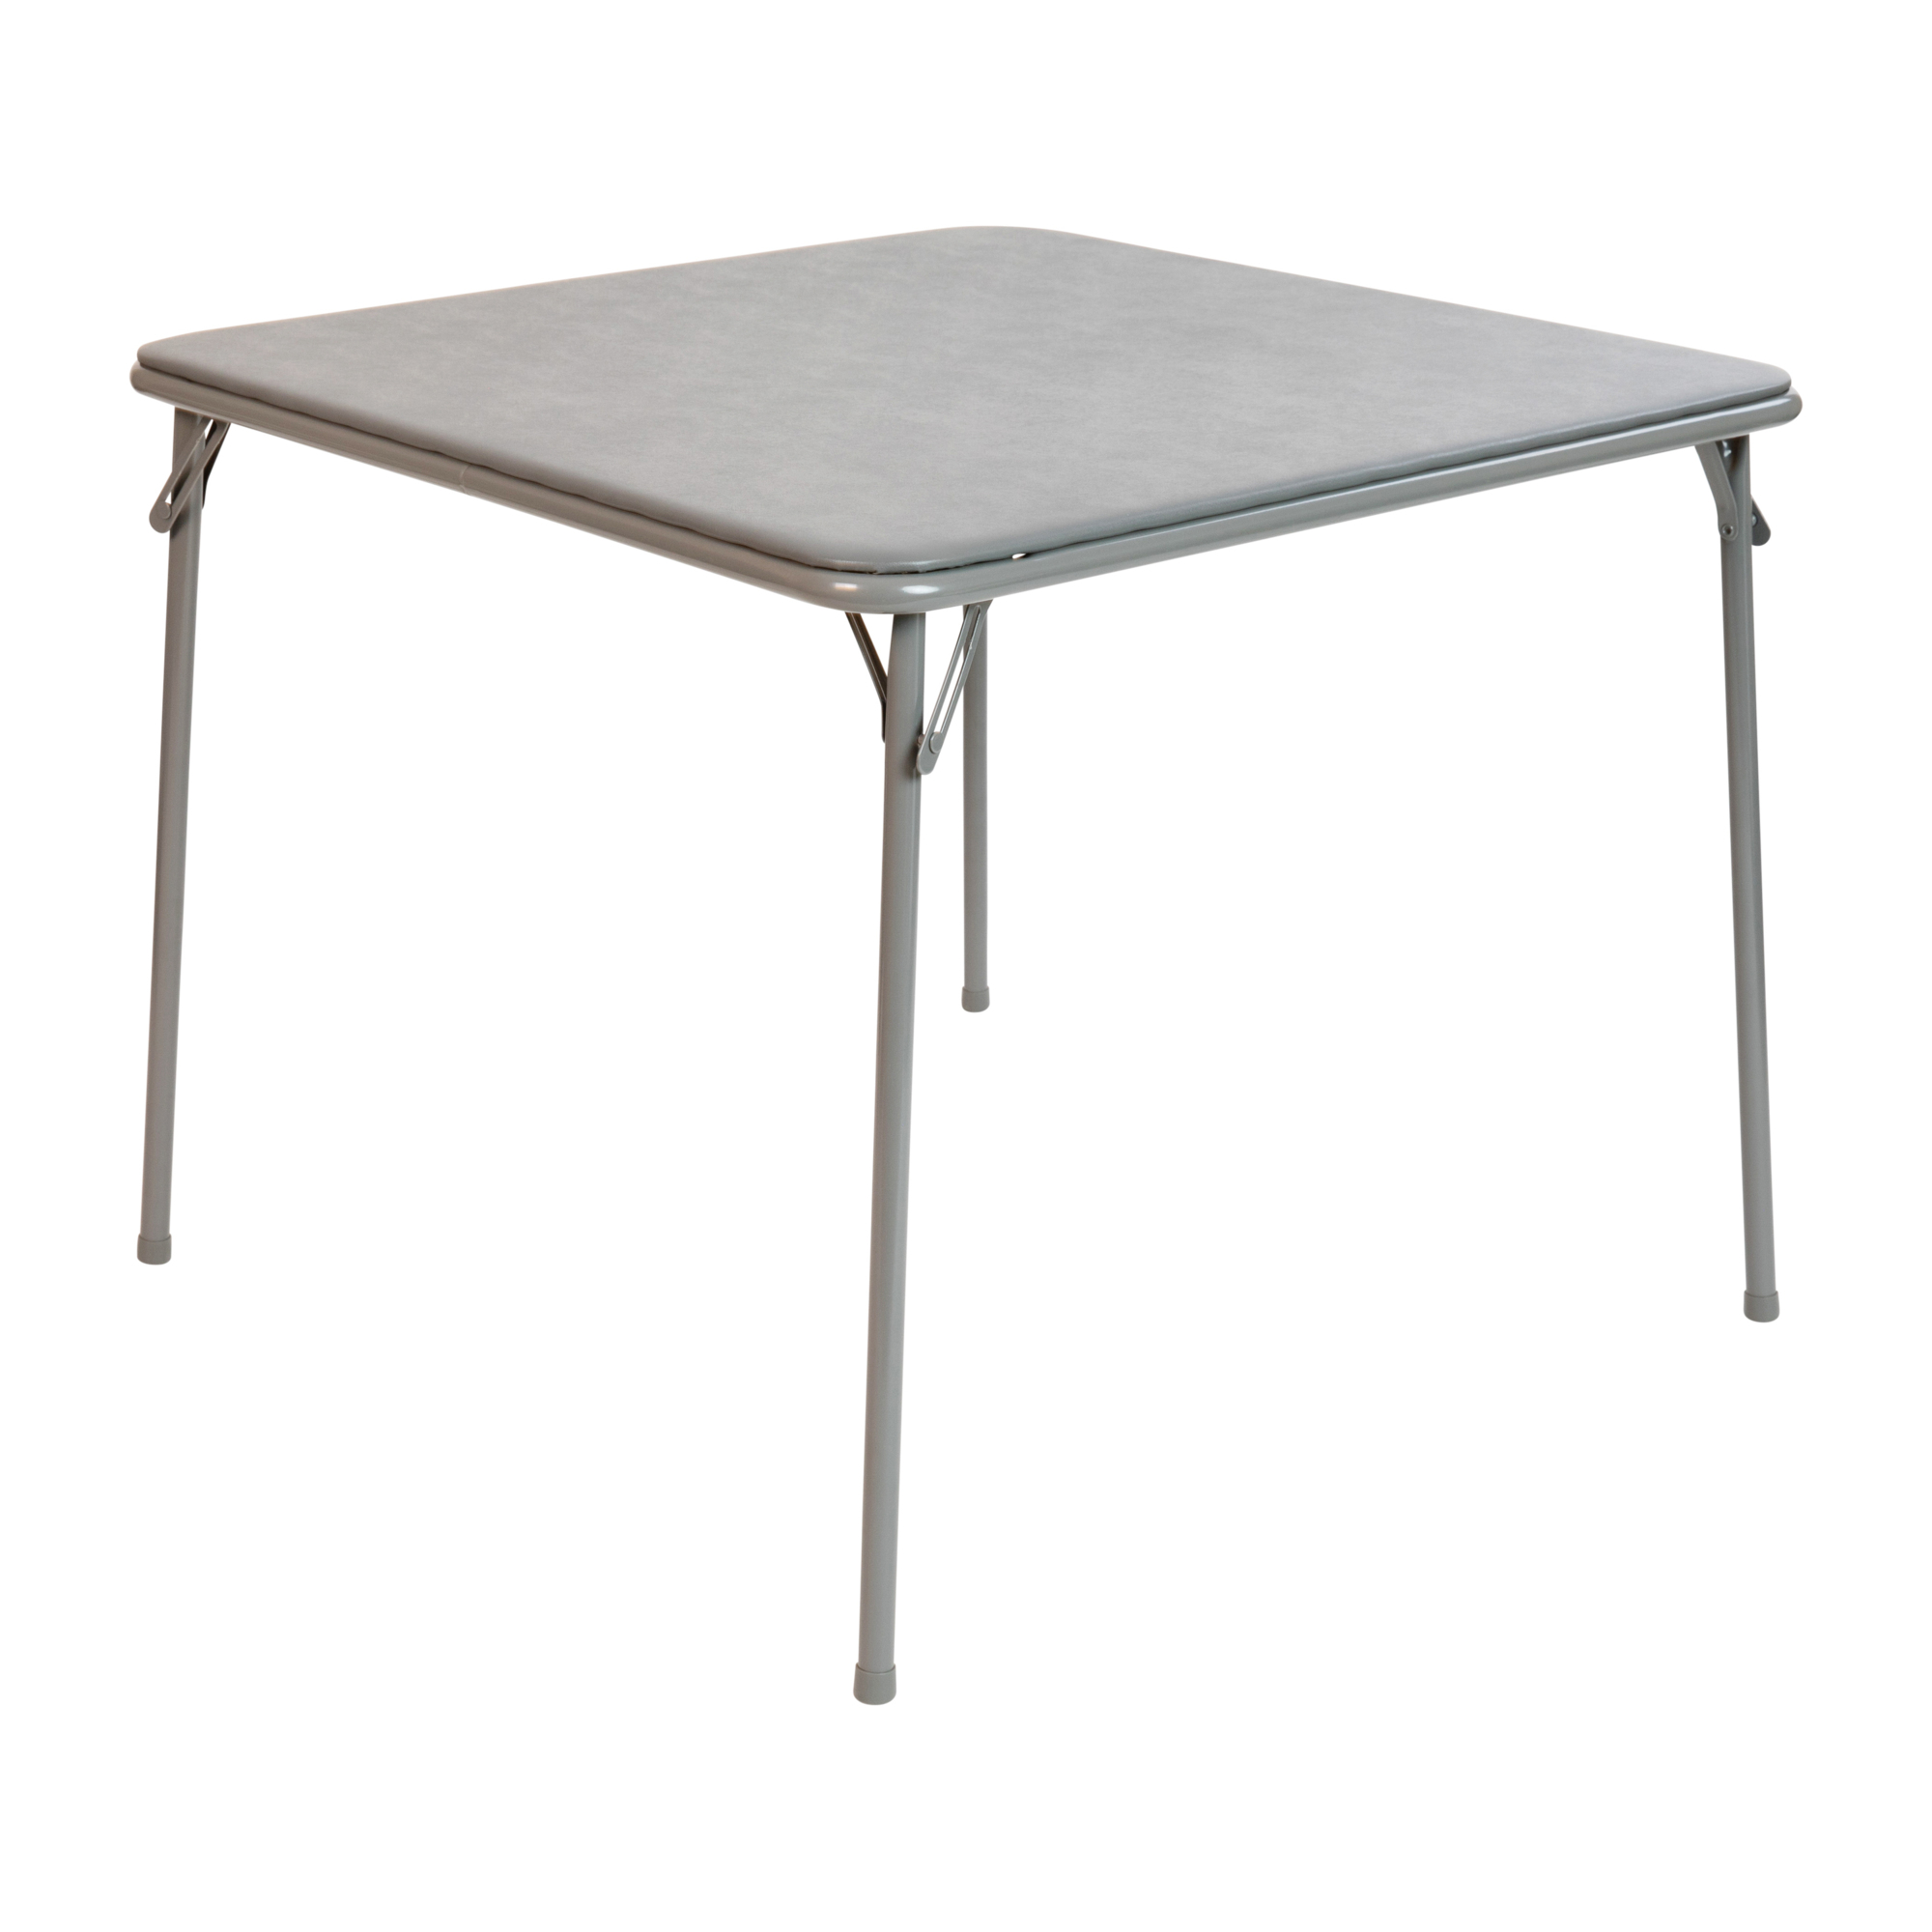 Flash Furniture, Gray Folding Card Table - Portable Game Table, Height 27.75 in, Width 33.5 in, Length 33.5 in, Model JB2GY